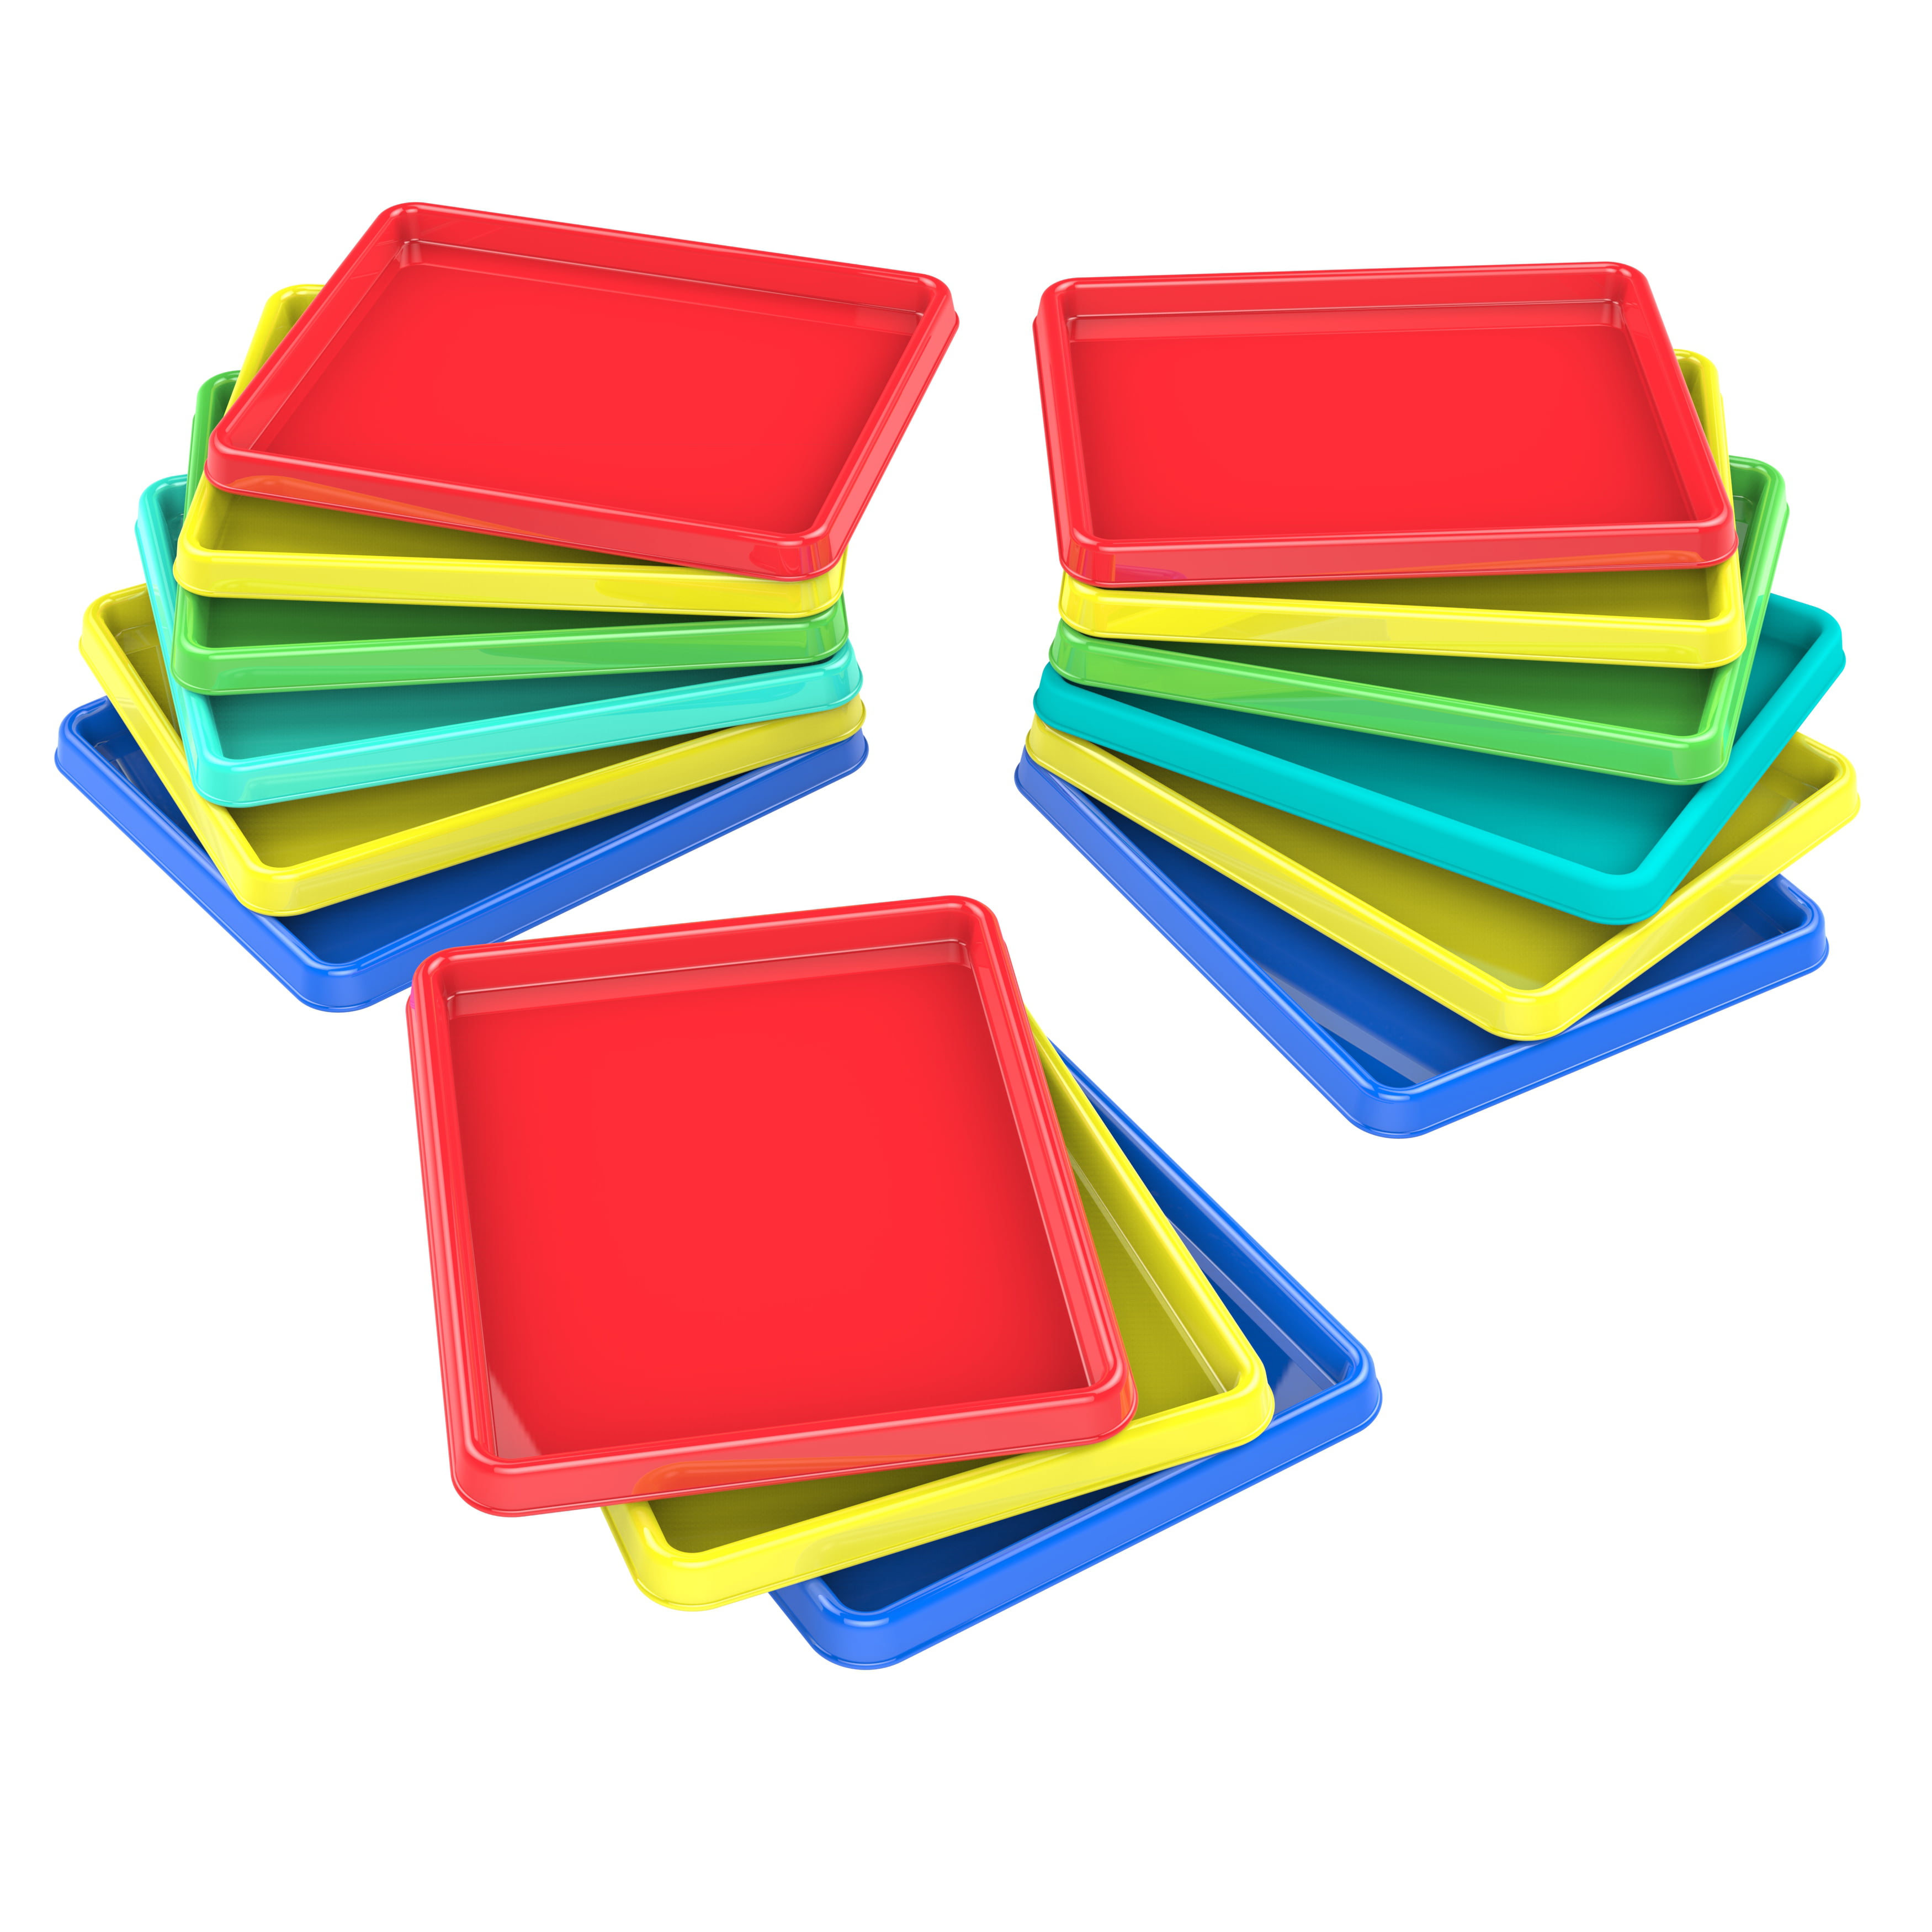 Storex Sorting and Crafts Tray, 12x16 Inches, Assorted Colors, Set